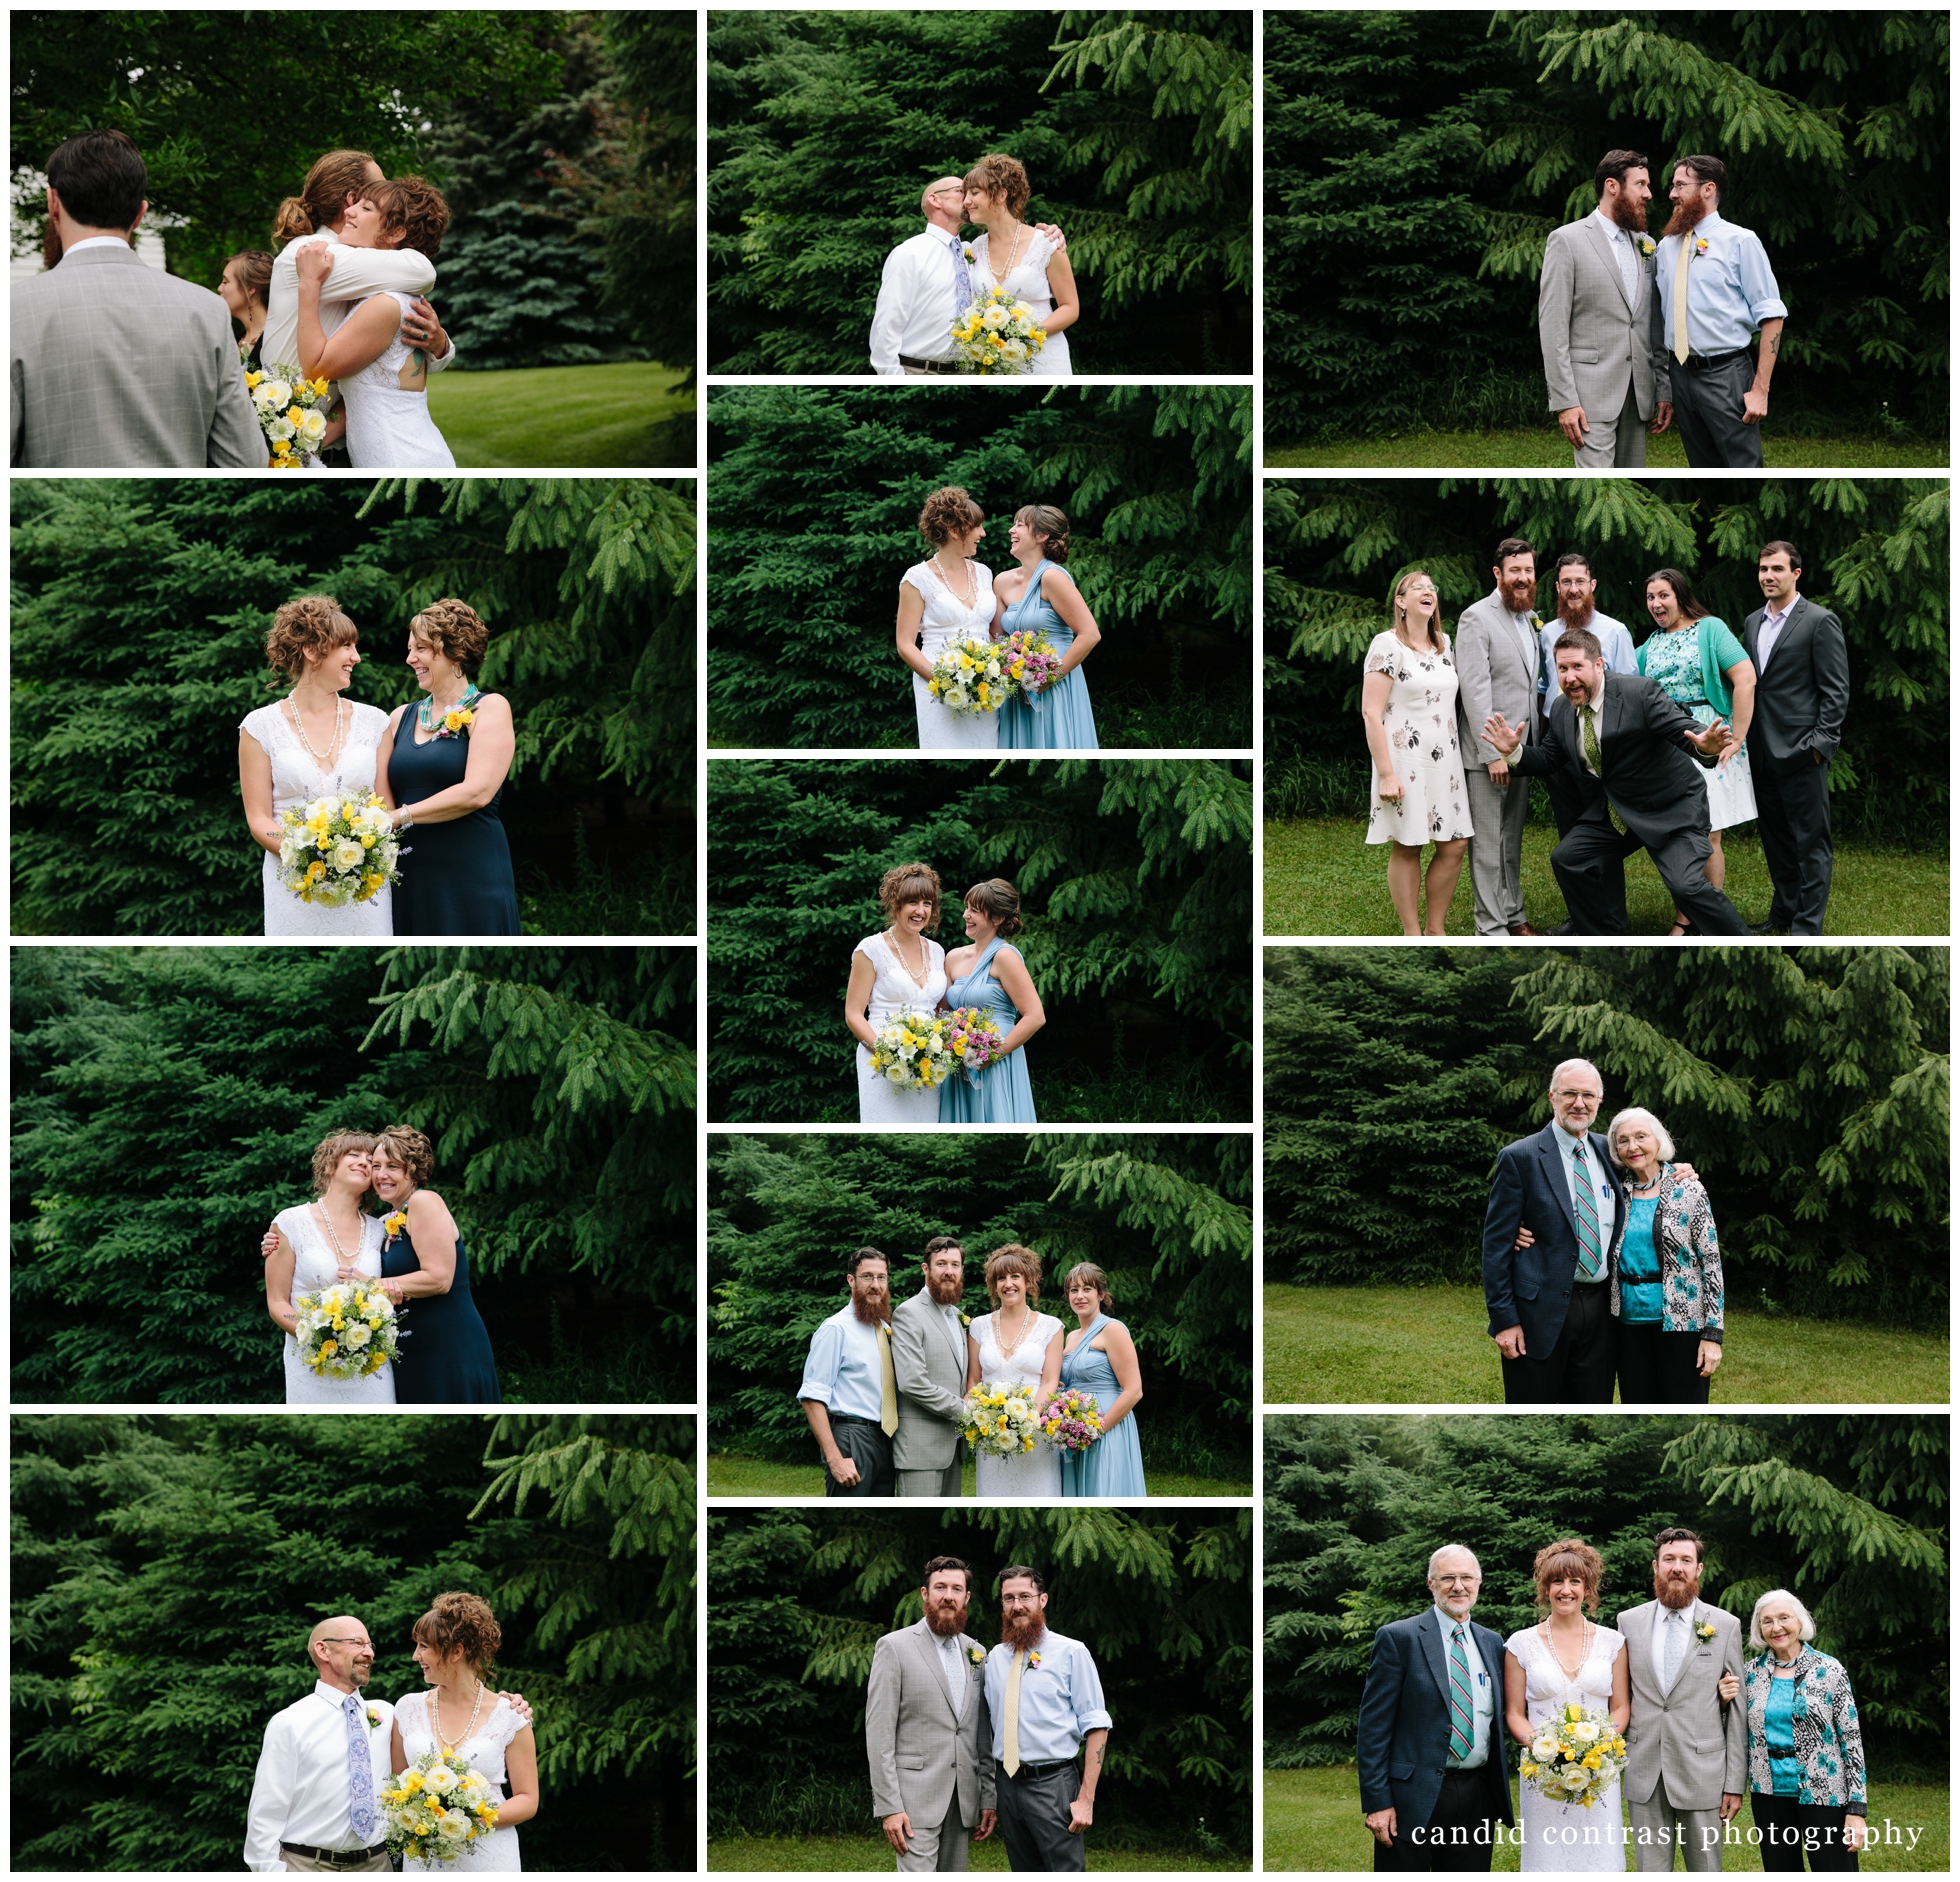 modern family formals at backyard wedding in dubuque, ia, candid contrast photography